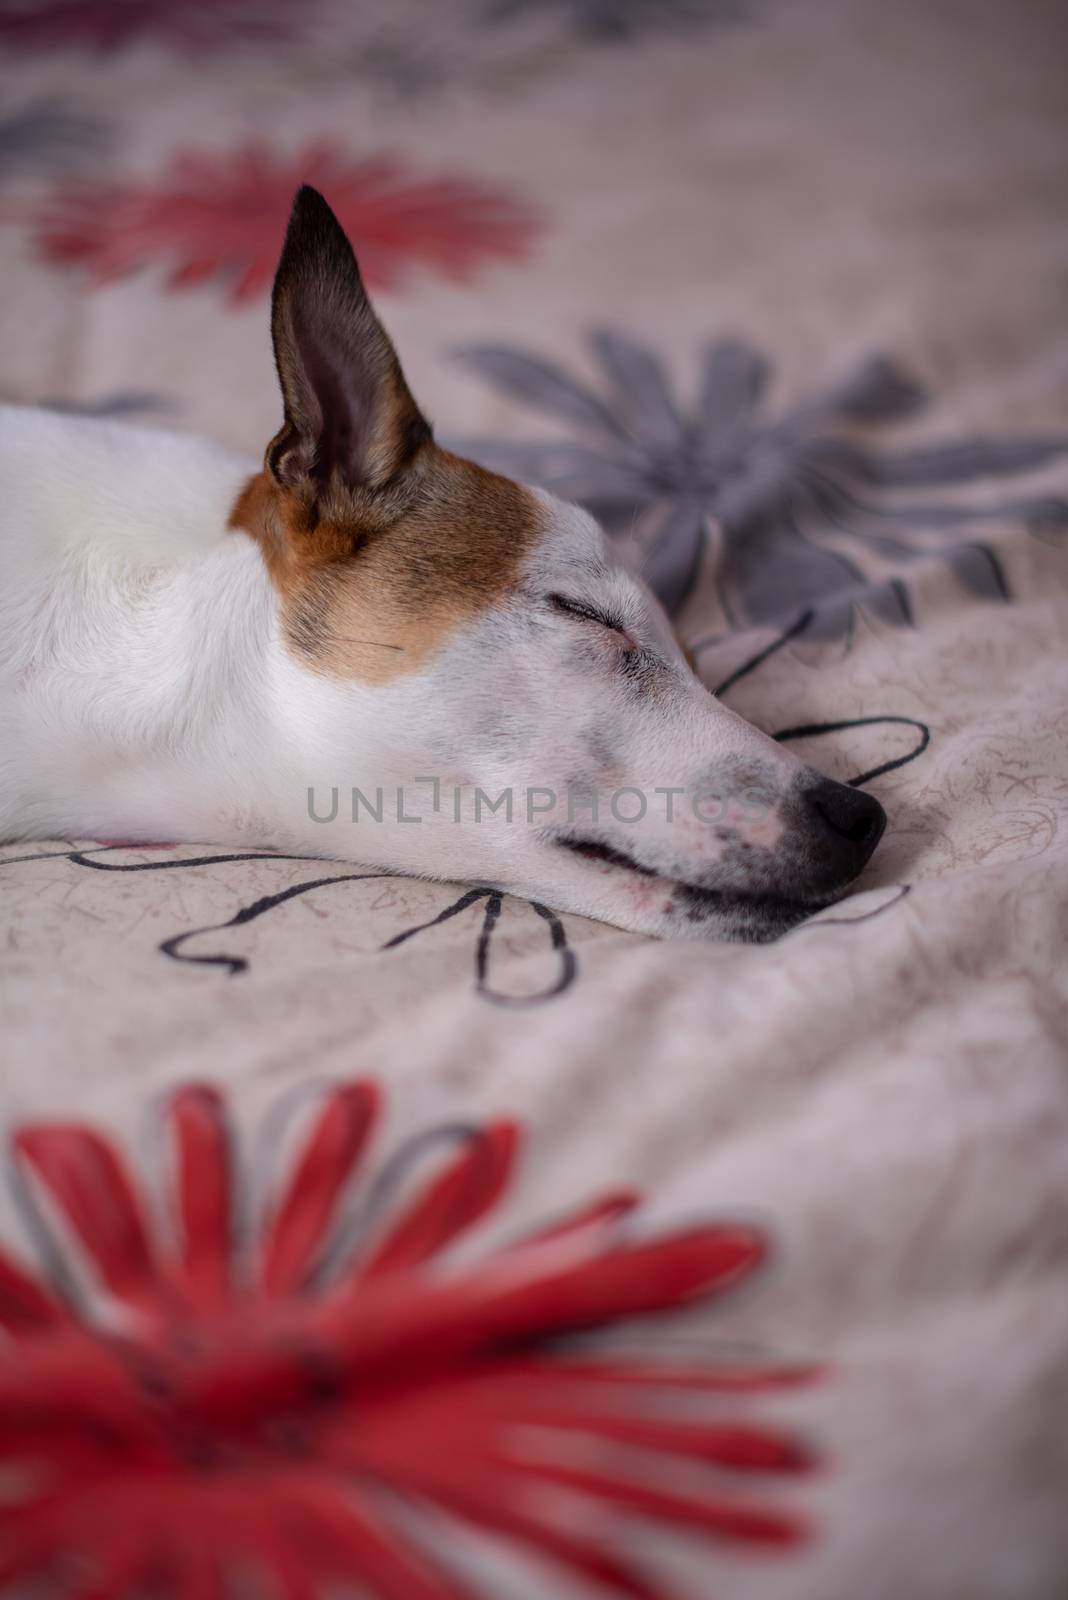 Verical shot of terrier puppy asleep on bed with ear alert